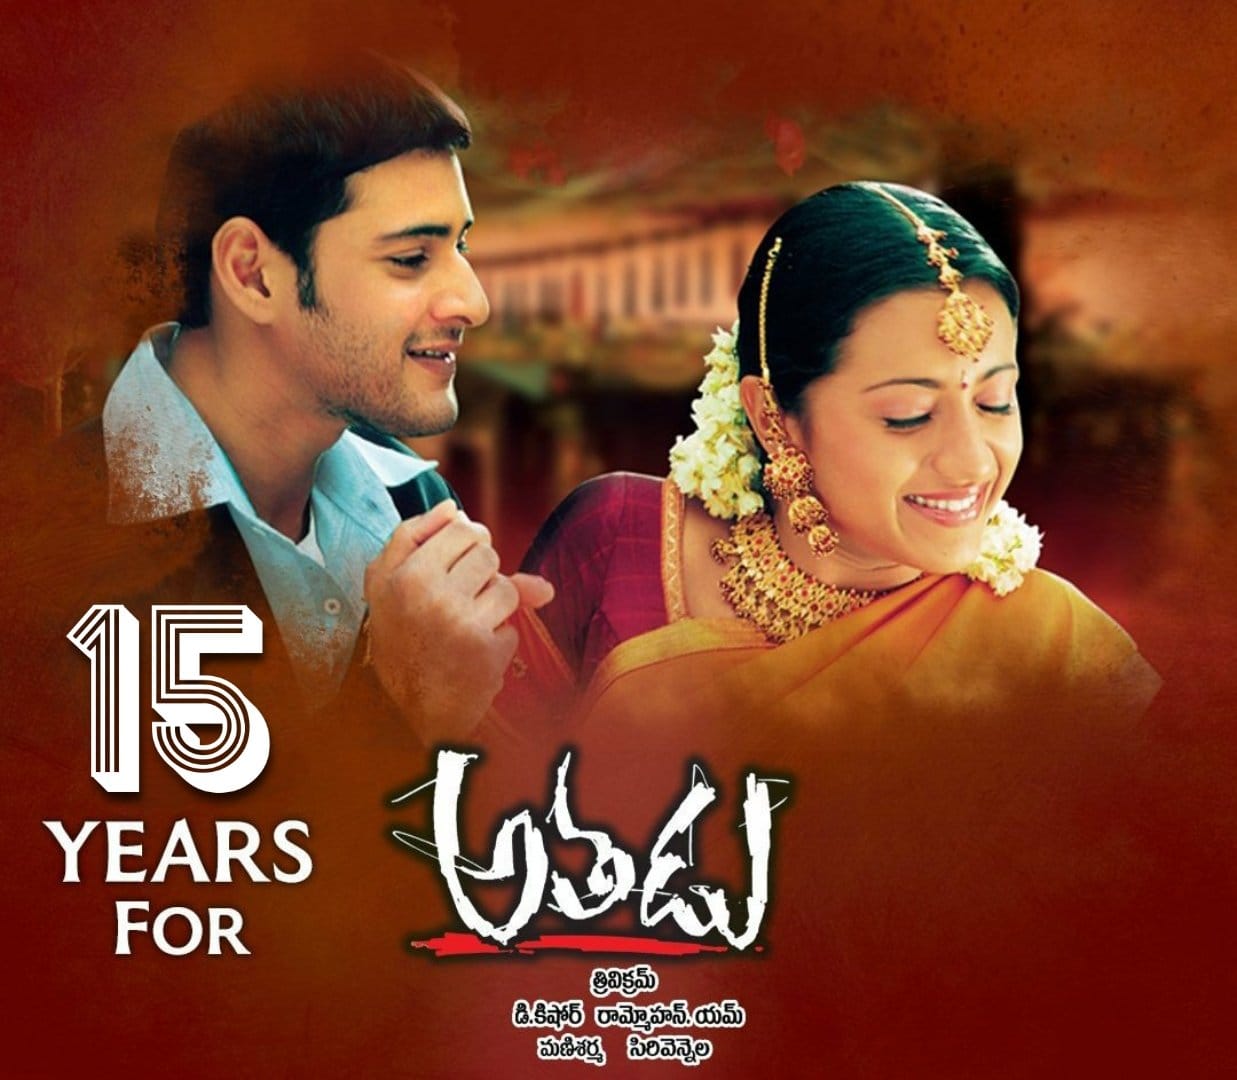 15 years of Athadu- Here are some unknown facts